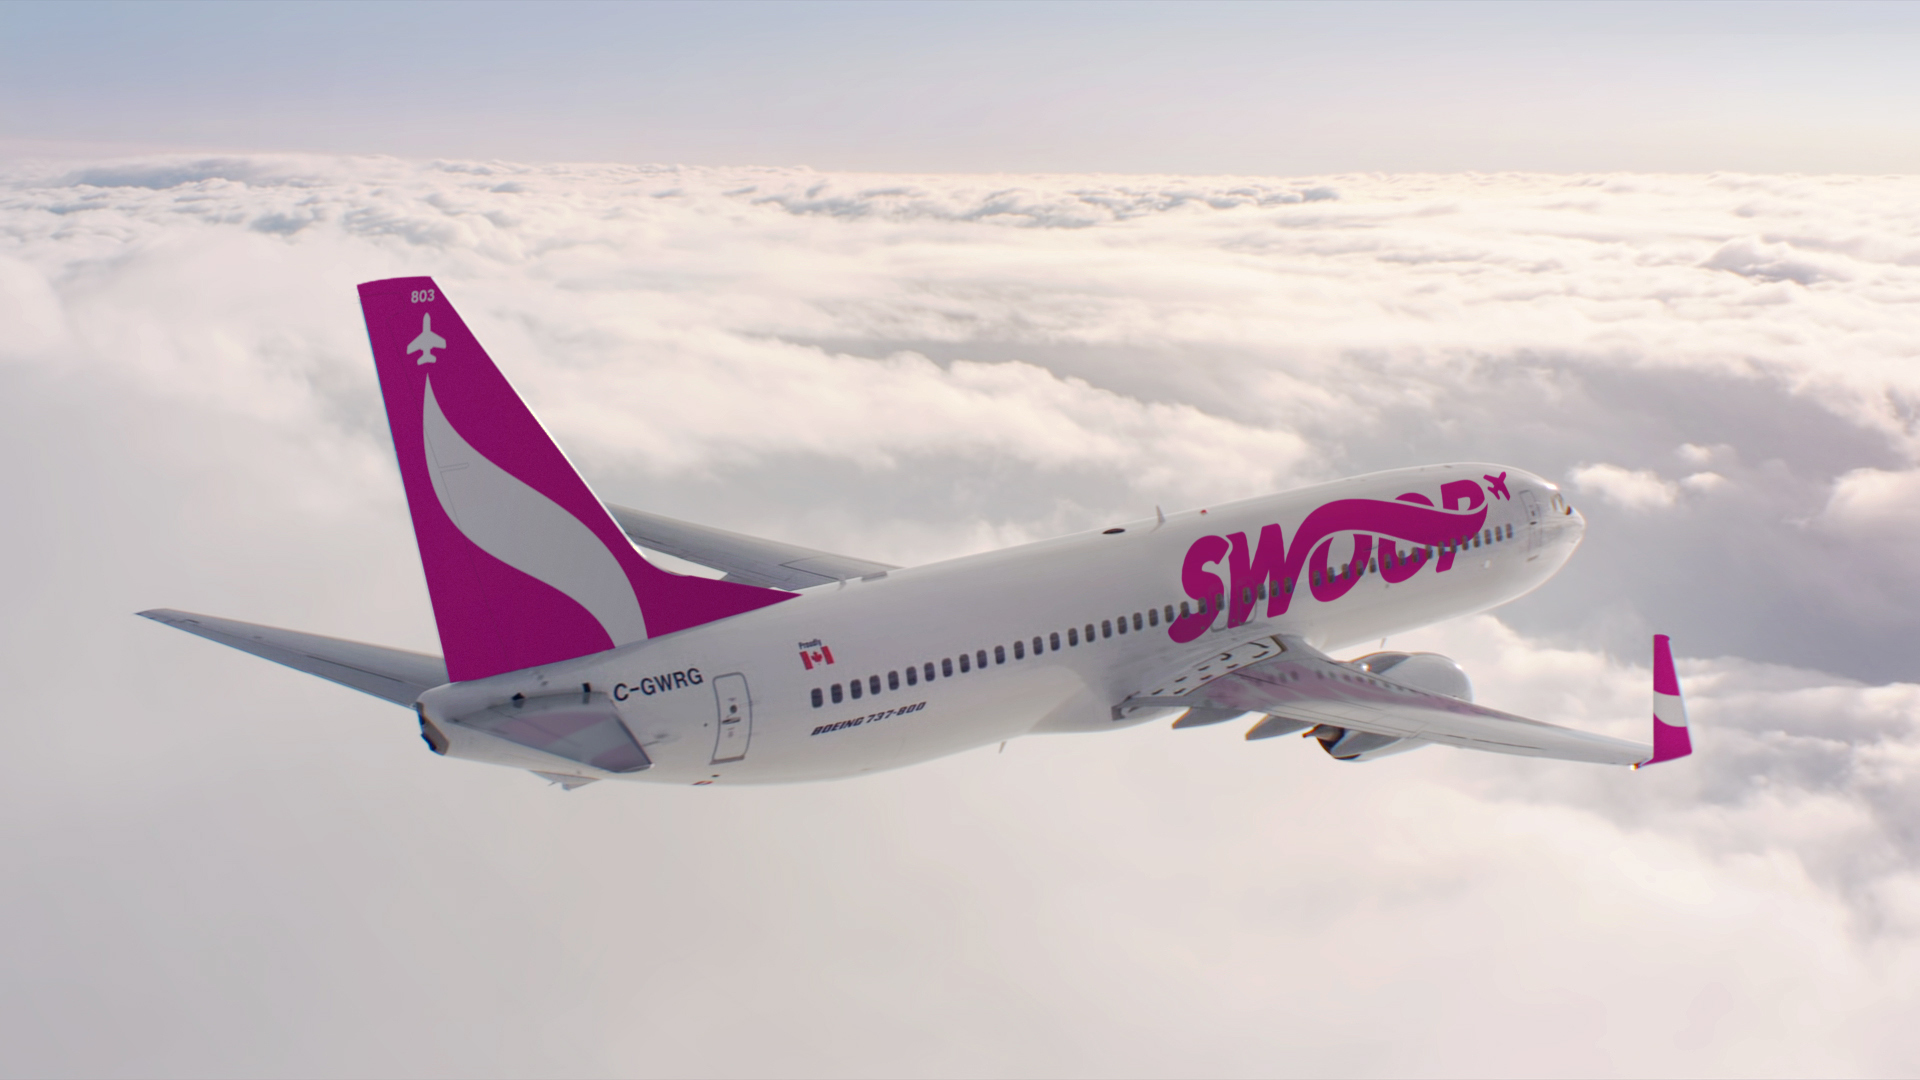 20 Off Promo Code Sale On Swoop Fares From 80 Cad Roundtrip